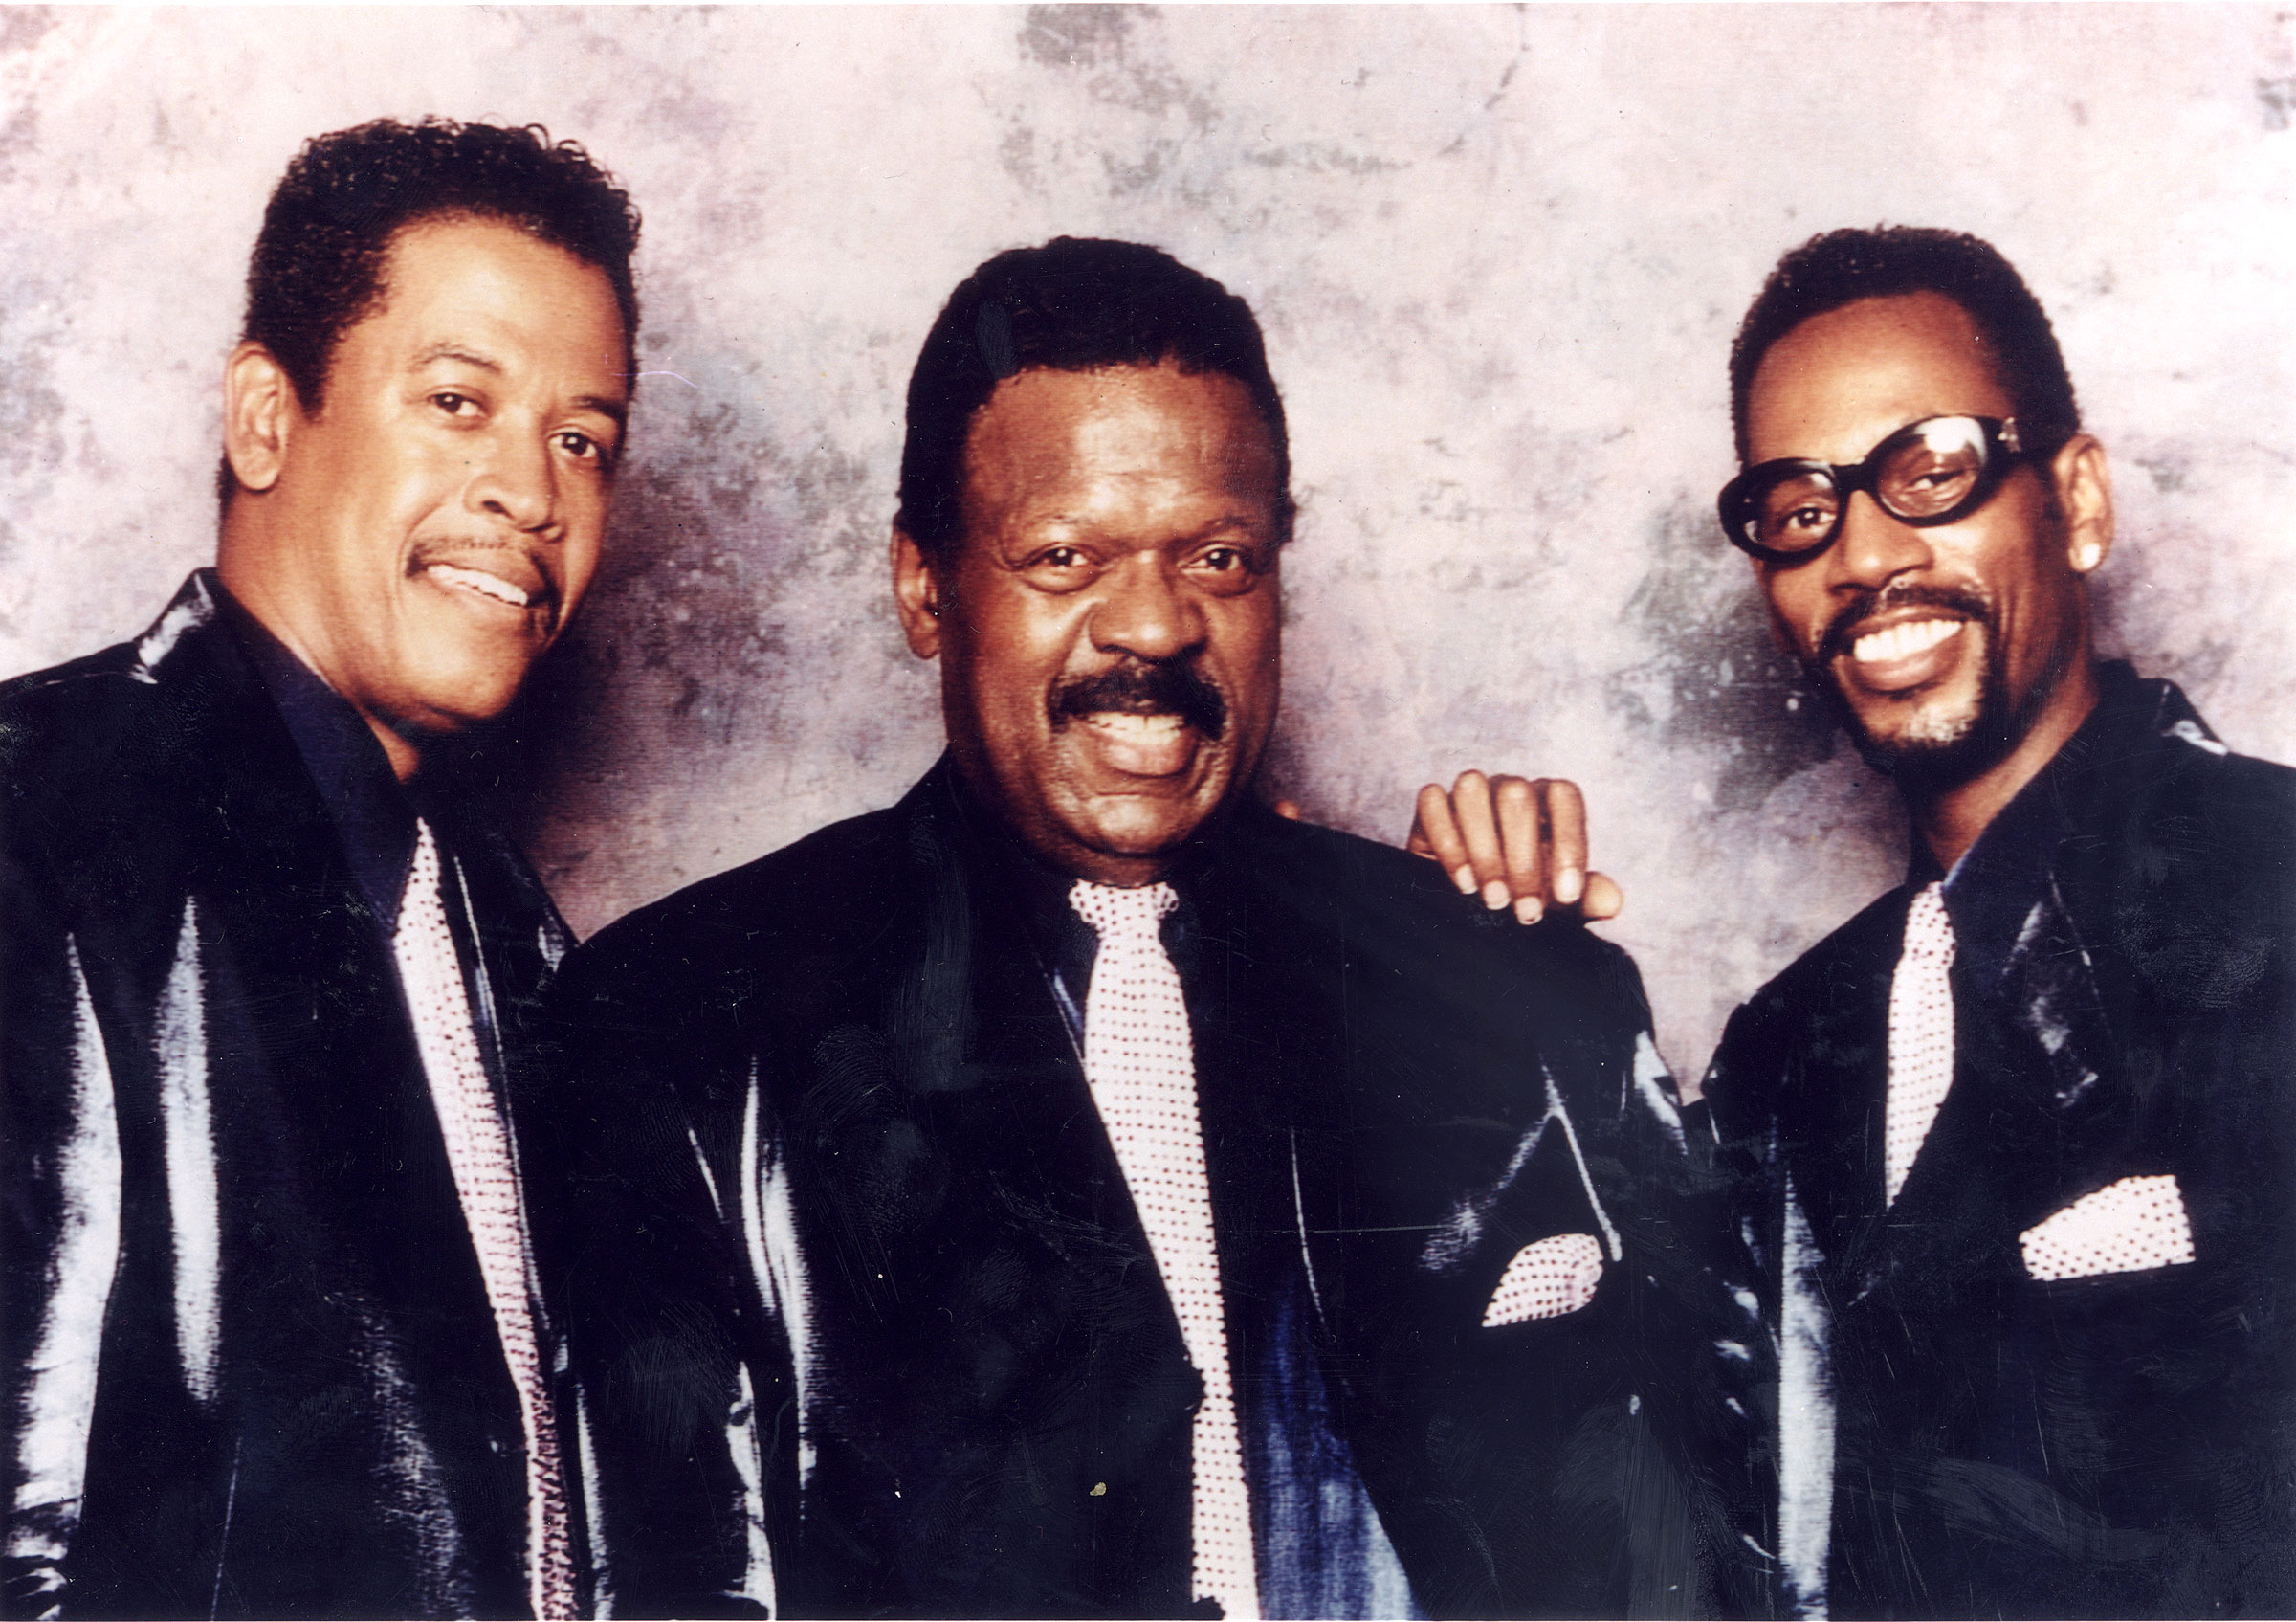 The Delfonics appear in The 70's Soul Jam Valentine's Concert at NYC's Beacon Theatre on February 14, 2015 with shows at 3pm & 8pm.